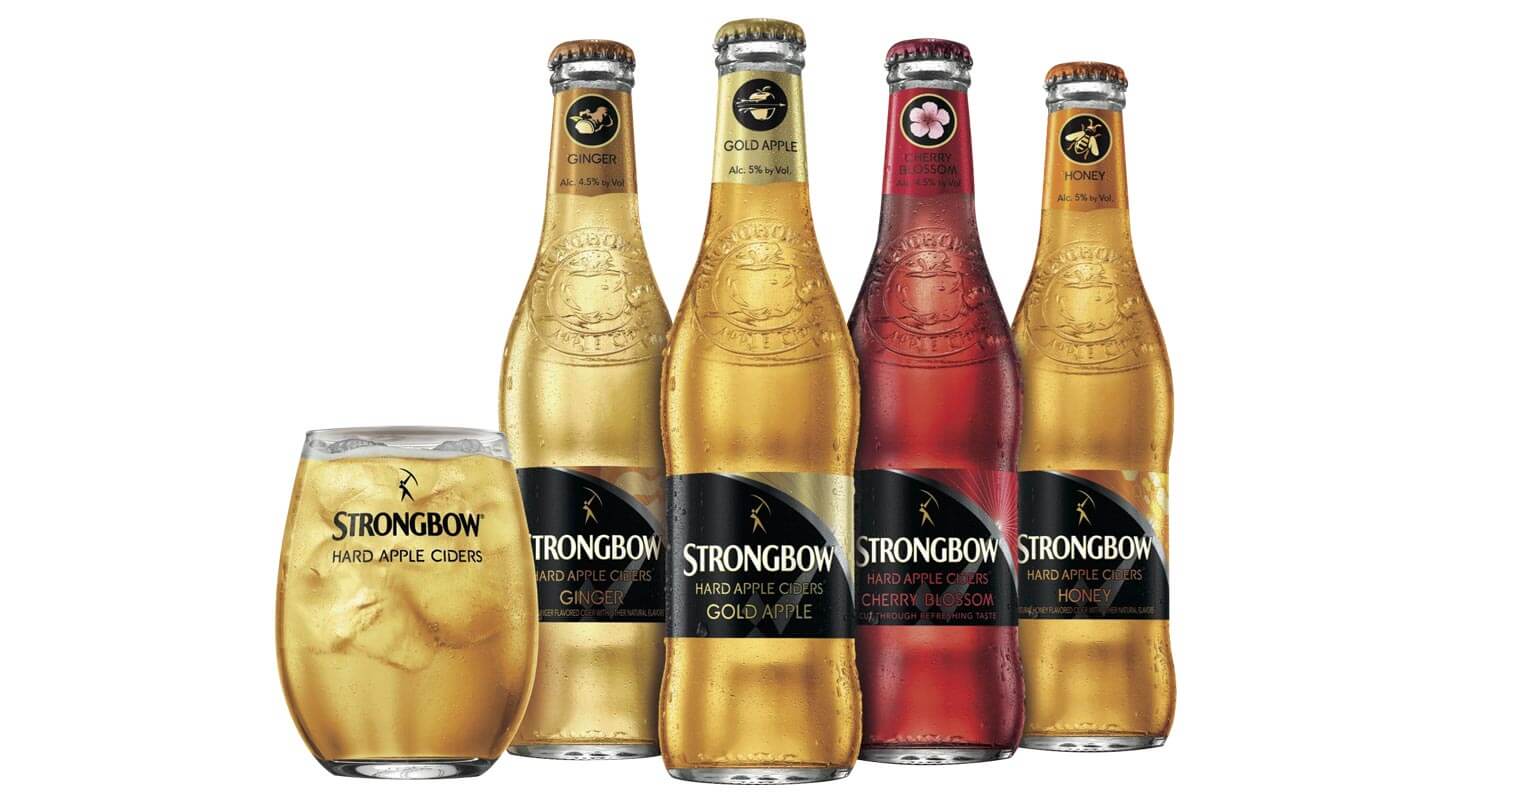 Strongbow Hard Apple Cider Invites Consumers To Find Their Fall Flavor, featured image